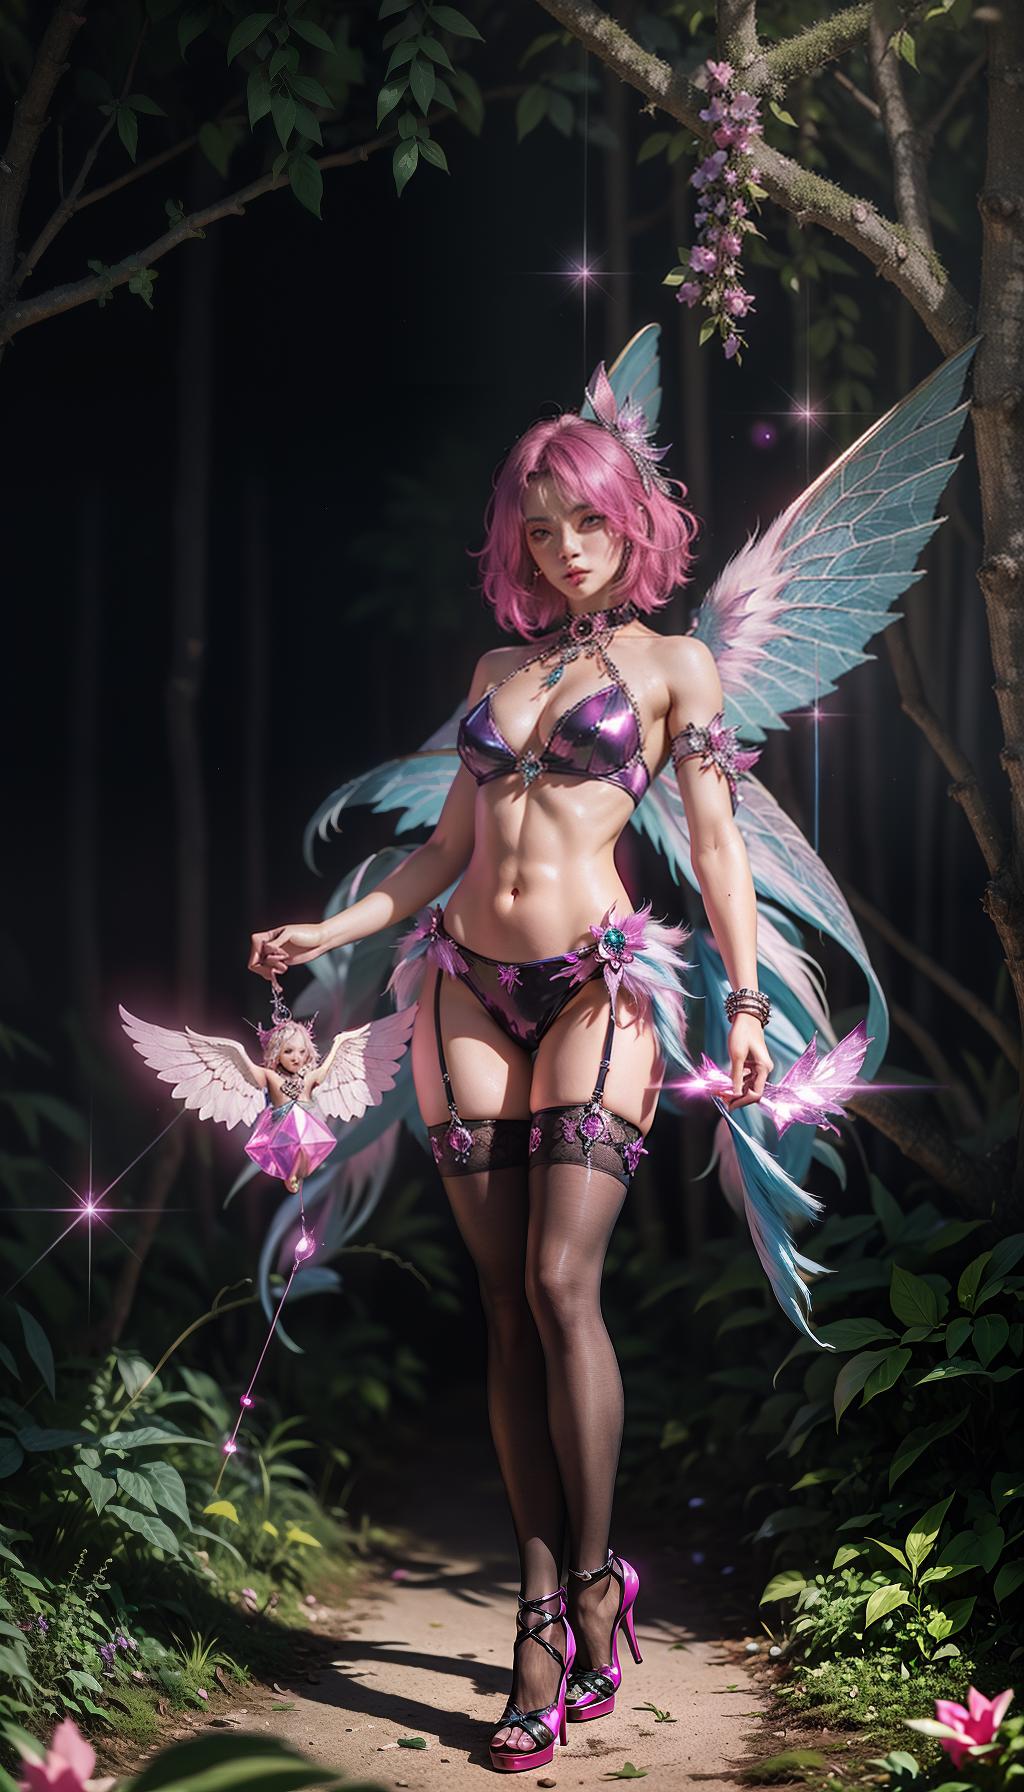  (a woman wearing glowing outfit with stockings standing in the middle of forest:1.3), (heels made of crystals:1.1), magical illustration, dark night, low light, glowing crystals, aura, gown, wings,  (sparkling fantasy crystal:1.3), (fantasy illustration:1.3), beautiful woman, fantasy sparkling outfit, (muscular women with strong abs:1.3), (visible abs and navel:1.3), ( cinematic image:1.3), high quality textures, professional portrait, (magenta crystalpunk:1.1), magenta colour palette, high quality, high resolution, 8k, hyperdetailed, UHD, HD,